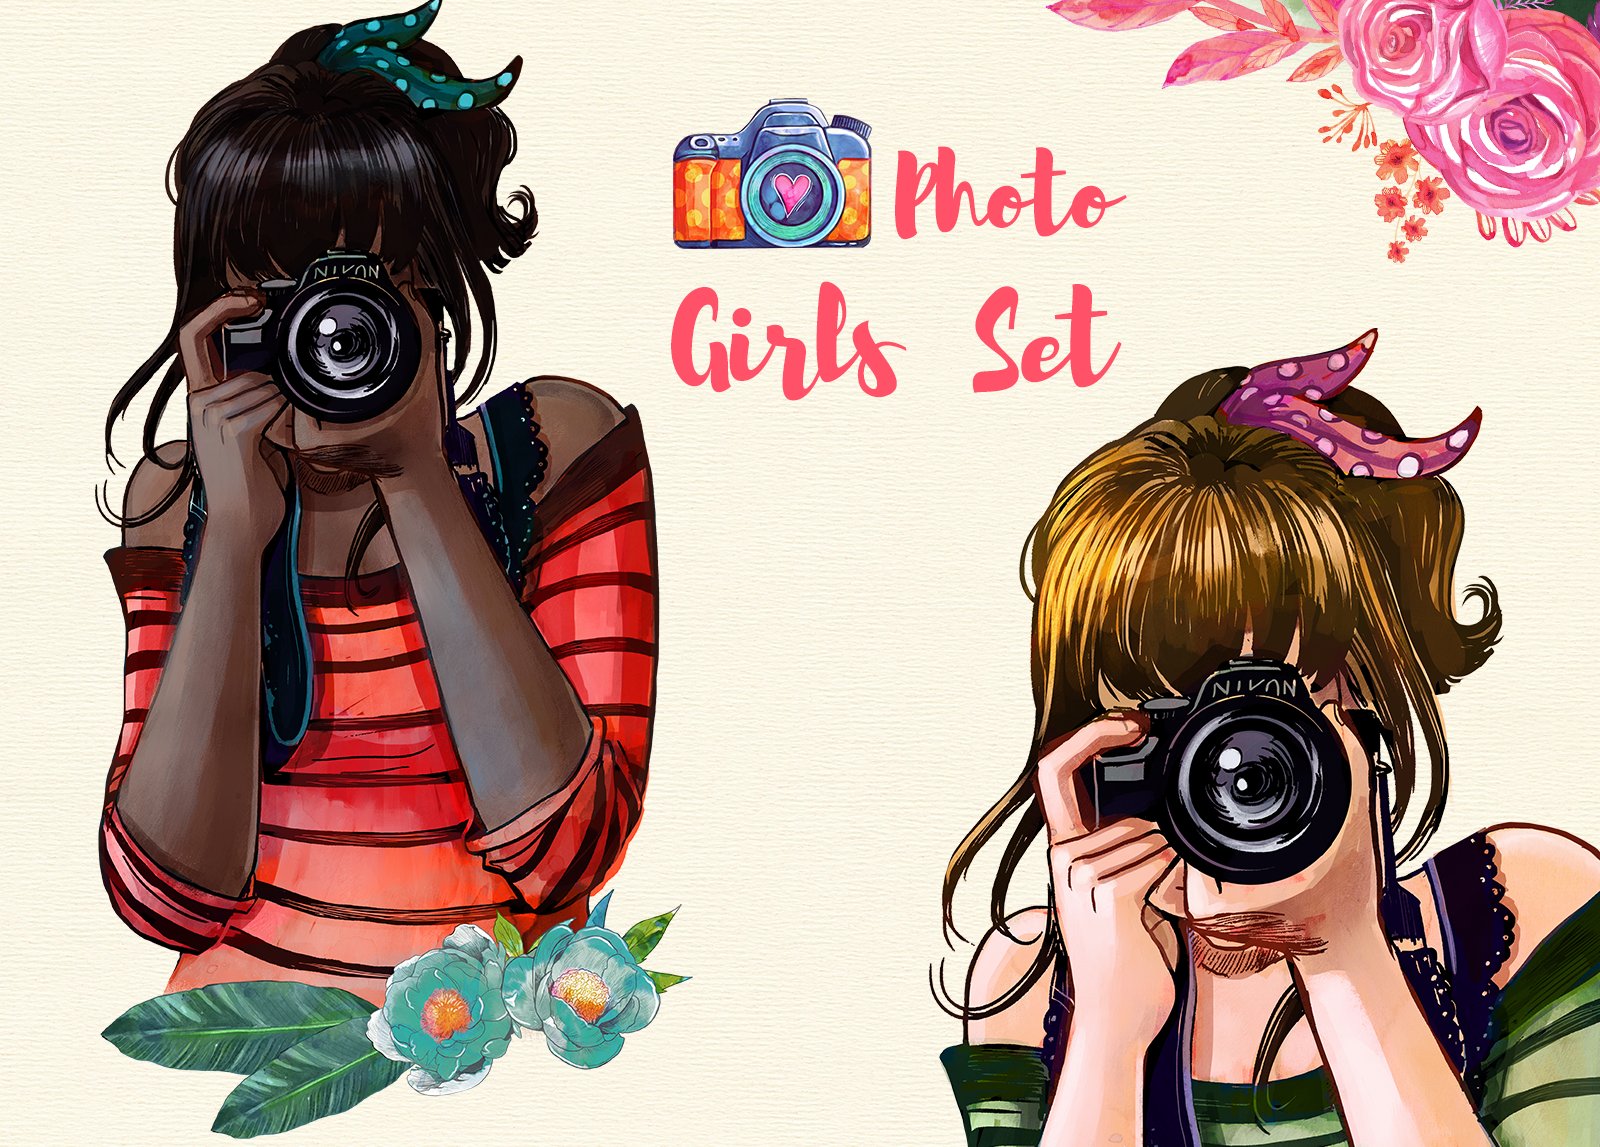 539 Photographer Girl Camera Sketch Style Images, Stock Photos & Vectors |  Shutterstock